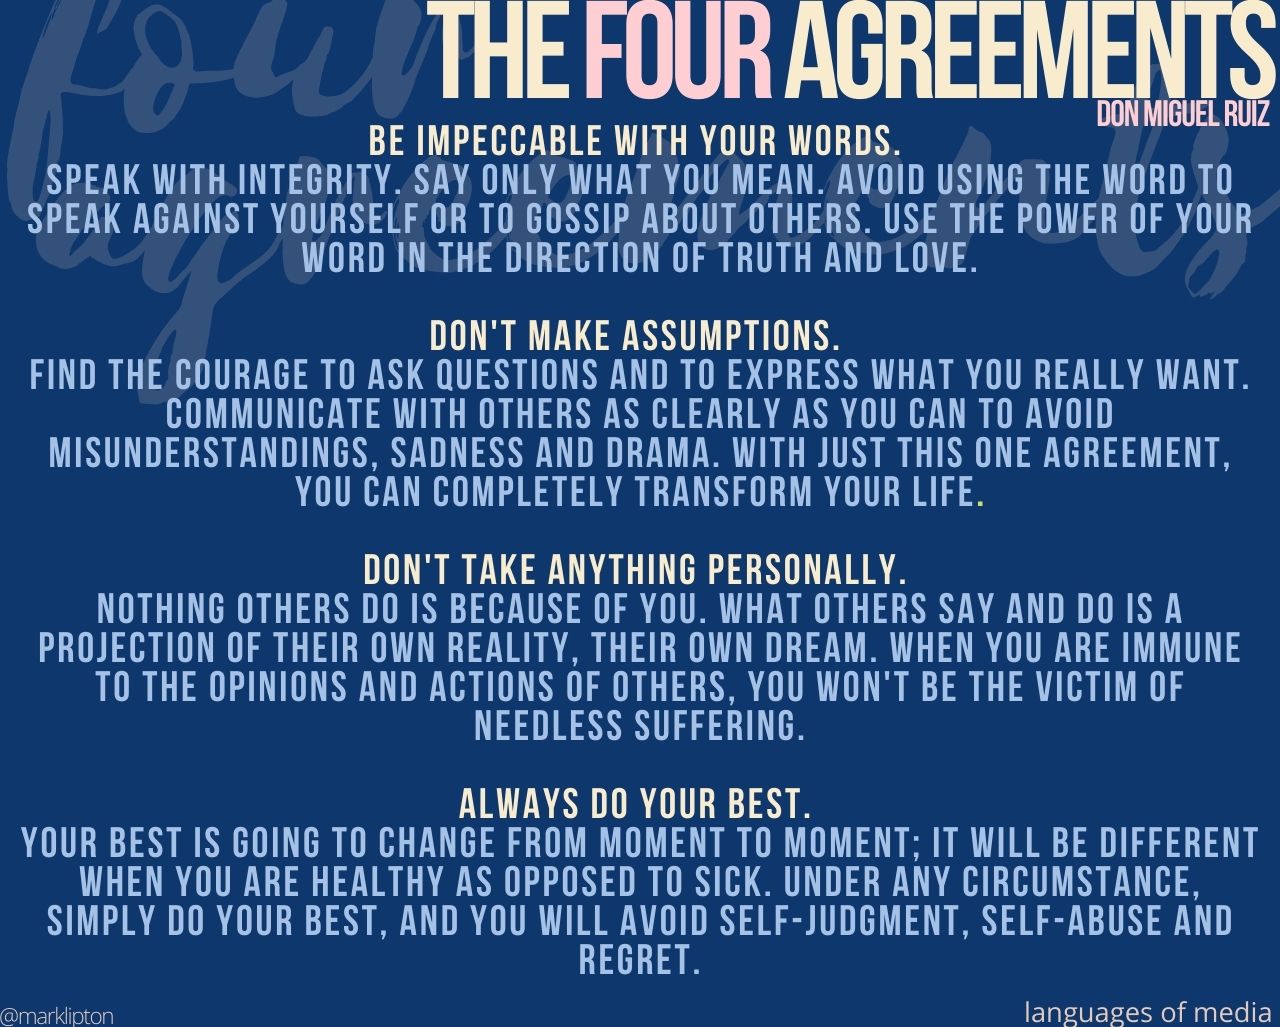 THE FOUR AGREEMENTS THE FOUR AGREEMENTS, FROM DON MIGUEL RUIZ Be impeccable with your words. Speak with integrity. Say only what you mean. Avoid using the word to speak against yourself or to gossip about others. Use the power of your word in the direction of truth and love. Don't make assumptions. Find the courage to ask questions and to express what you really want. Communicate with others as clearly as you can to avoid misunderstandings, sadness, and drama. With just this one agreement, you can completely transform your life. Don't take anything personally. Nothing others do is because of you. What others say and do is a projection of their own reality, their own dream. When you are immune to the opinions and actions of others, you won't be the victim of needless suffering. Always do your best. Your best is going to change from moment to moment; it will be different when you are healthy as opposed to sick. Under any circumstance, simply do your best, and you will avoid self-judgment, self-abuse, and regret.